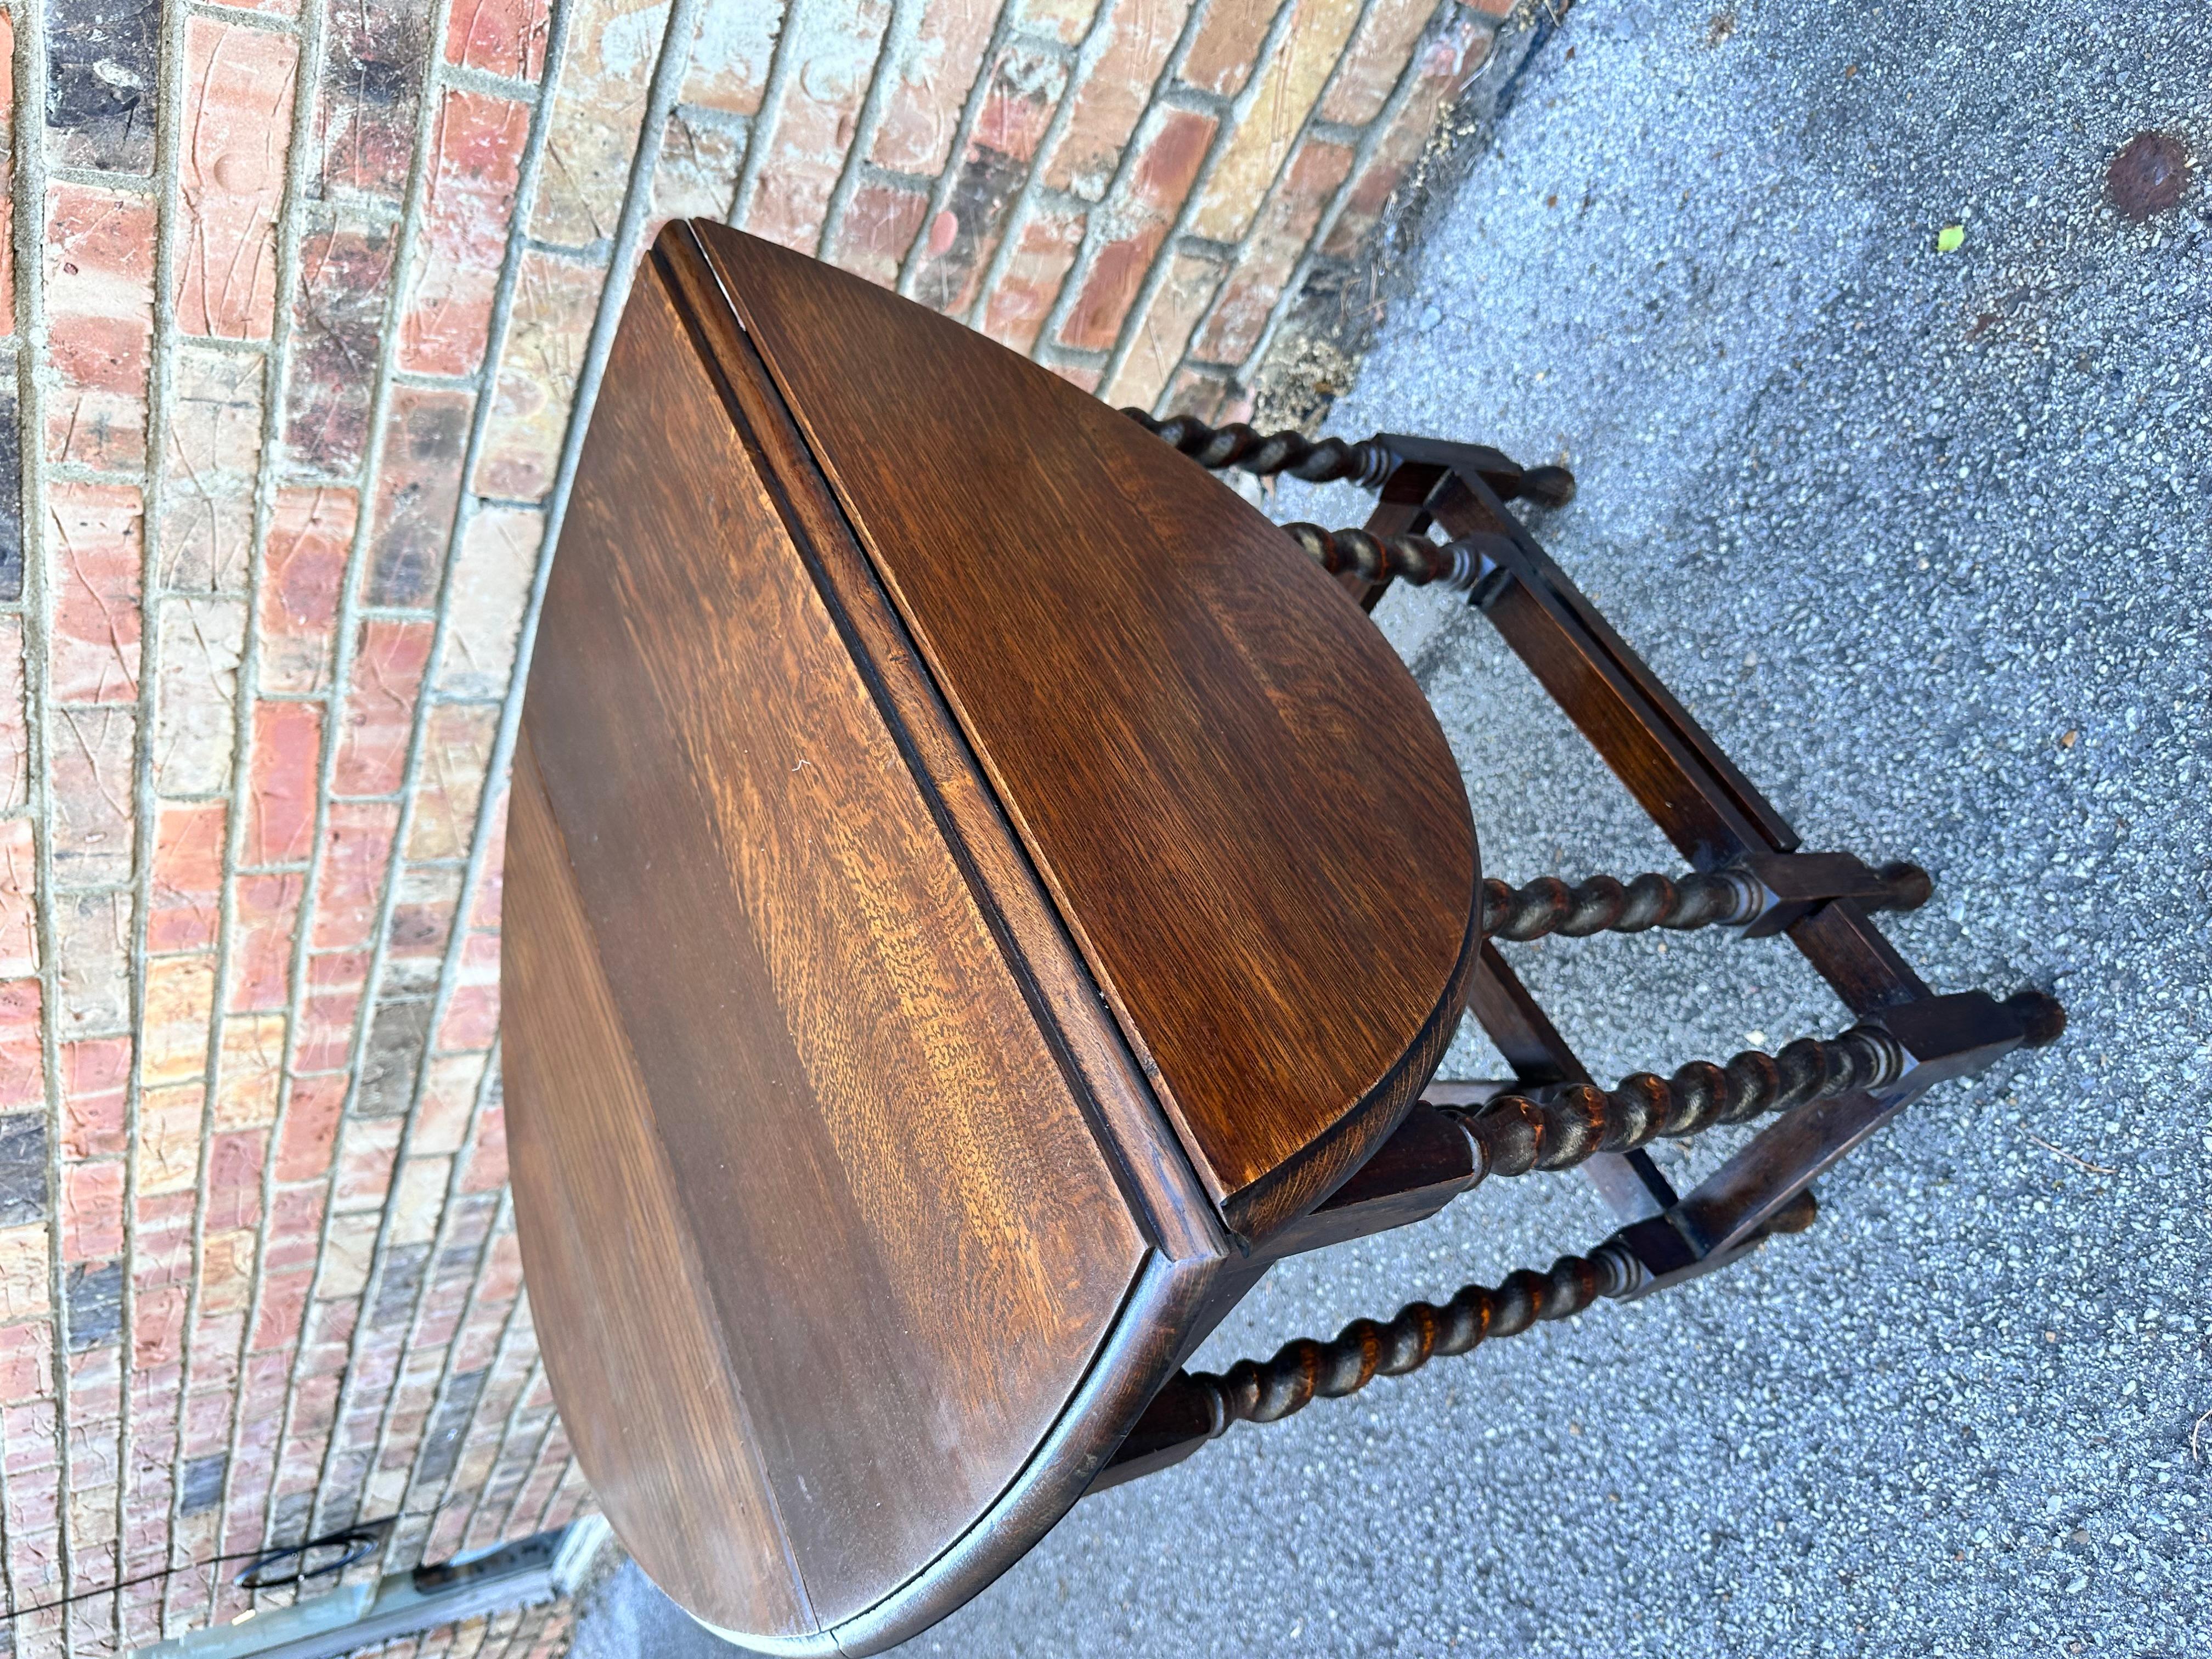 These 19th century antique English barley twist table are stunning! The table is made from oak and has a lovely dark finish and beautiful patina. The turned, spiral legs add the perfect touch of elegance, and the gate leg design allows the table to